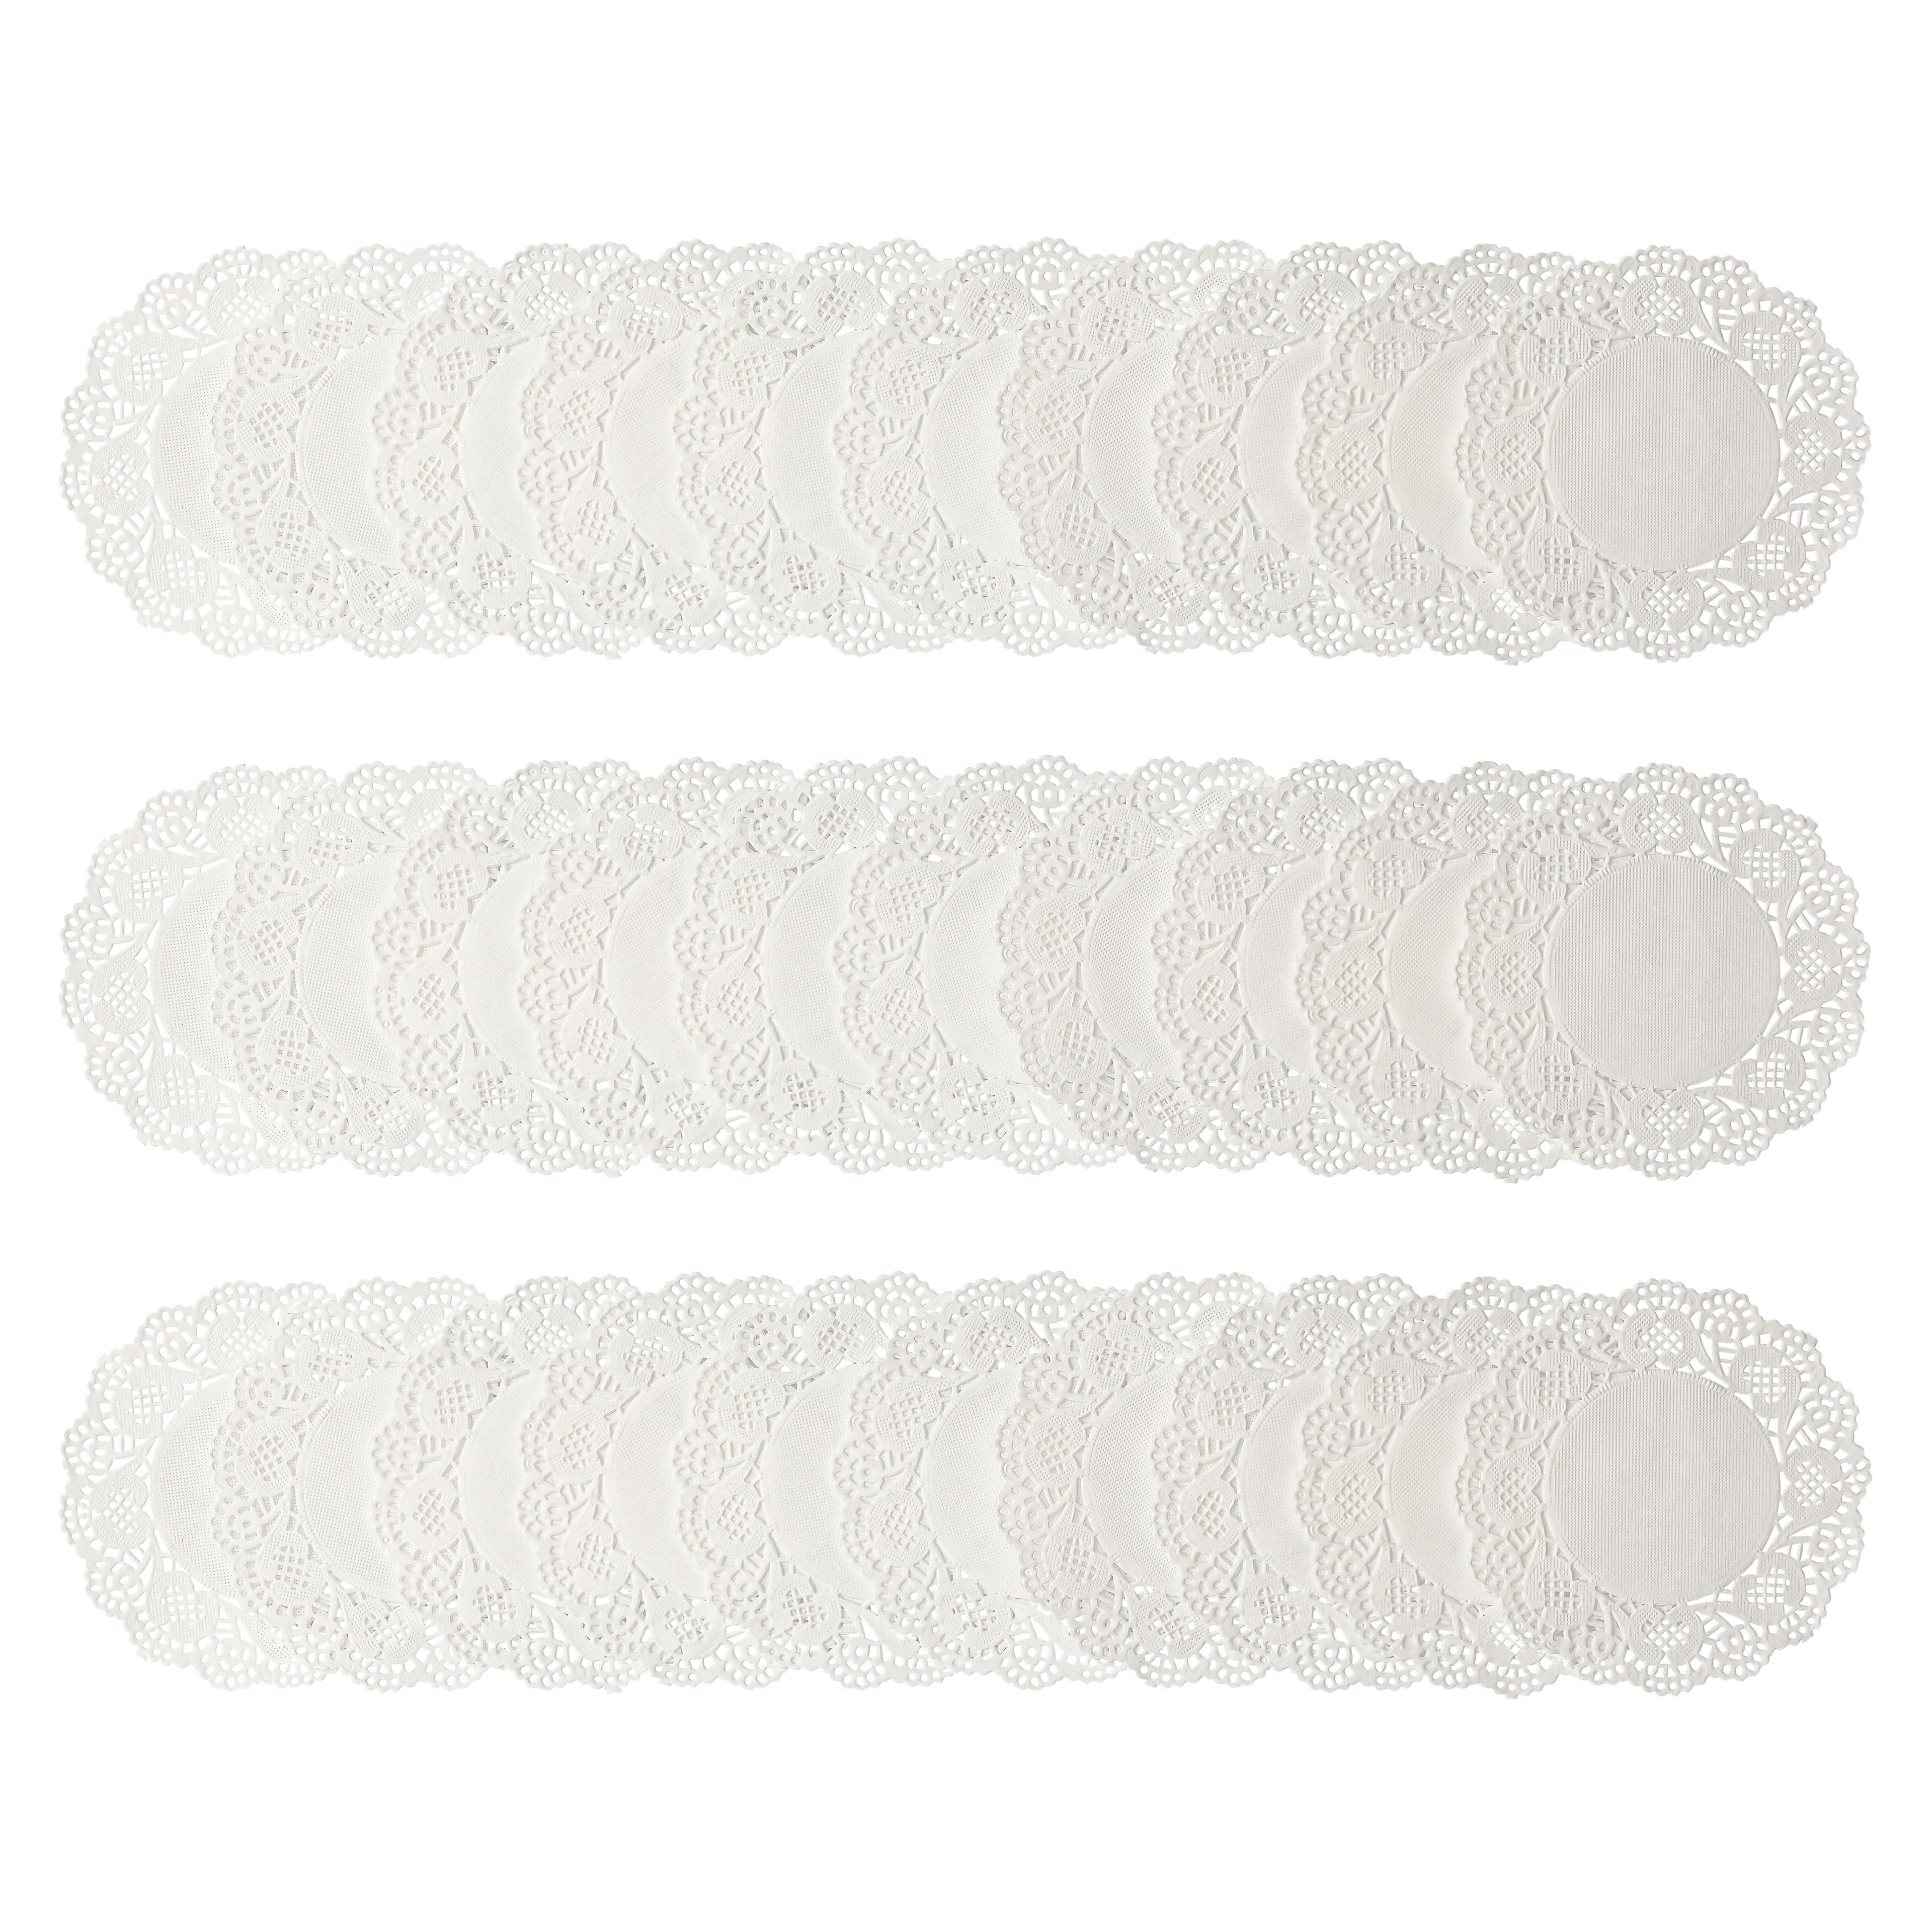 Satyam Kraft 4 in Paper Lace Doilies Cake Decoration Liner for Birthdays  Parties Table Mats, decoration on Festivals (Color : White) (4 Inch))